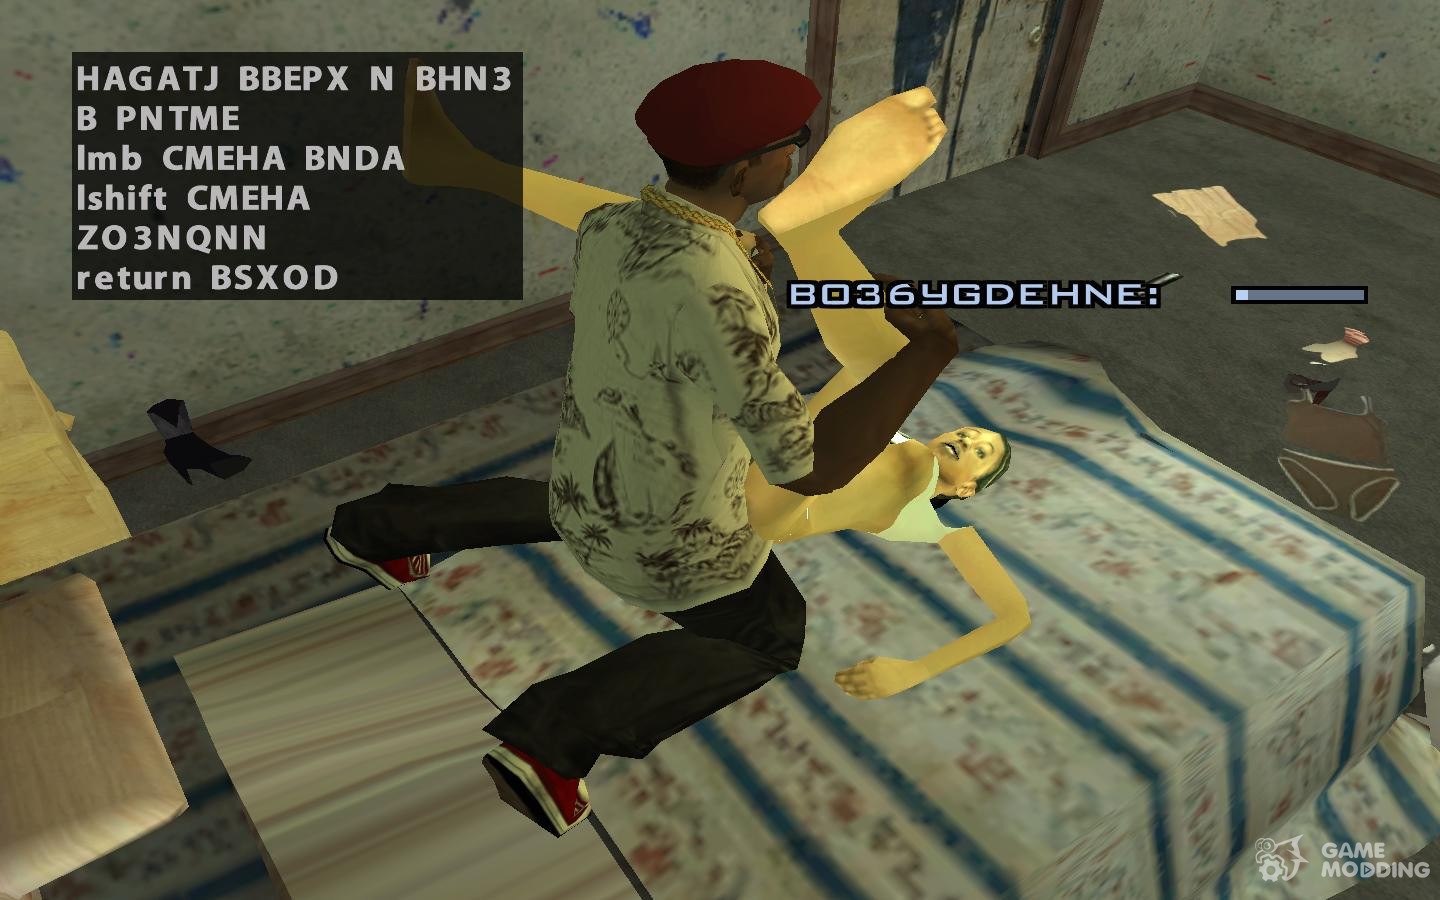 If you're into gta san andreas, you can now download and install gta s...